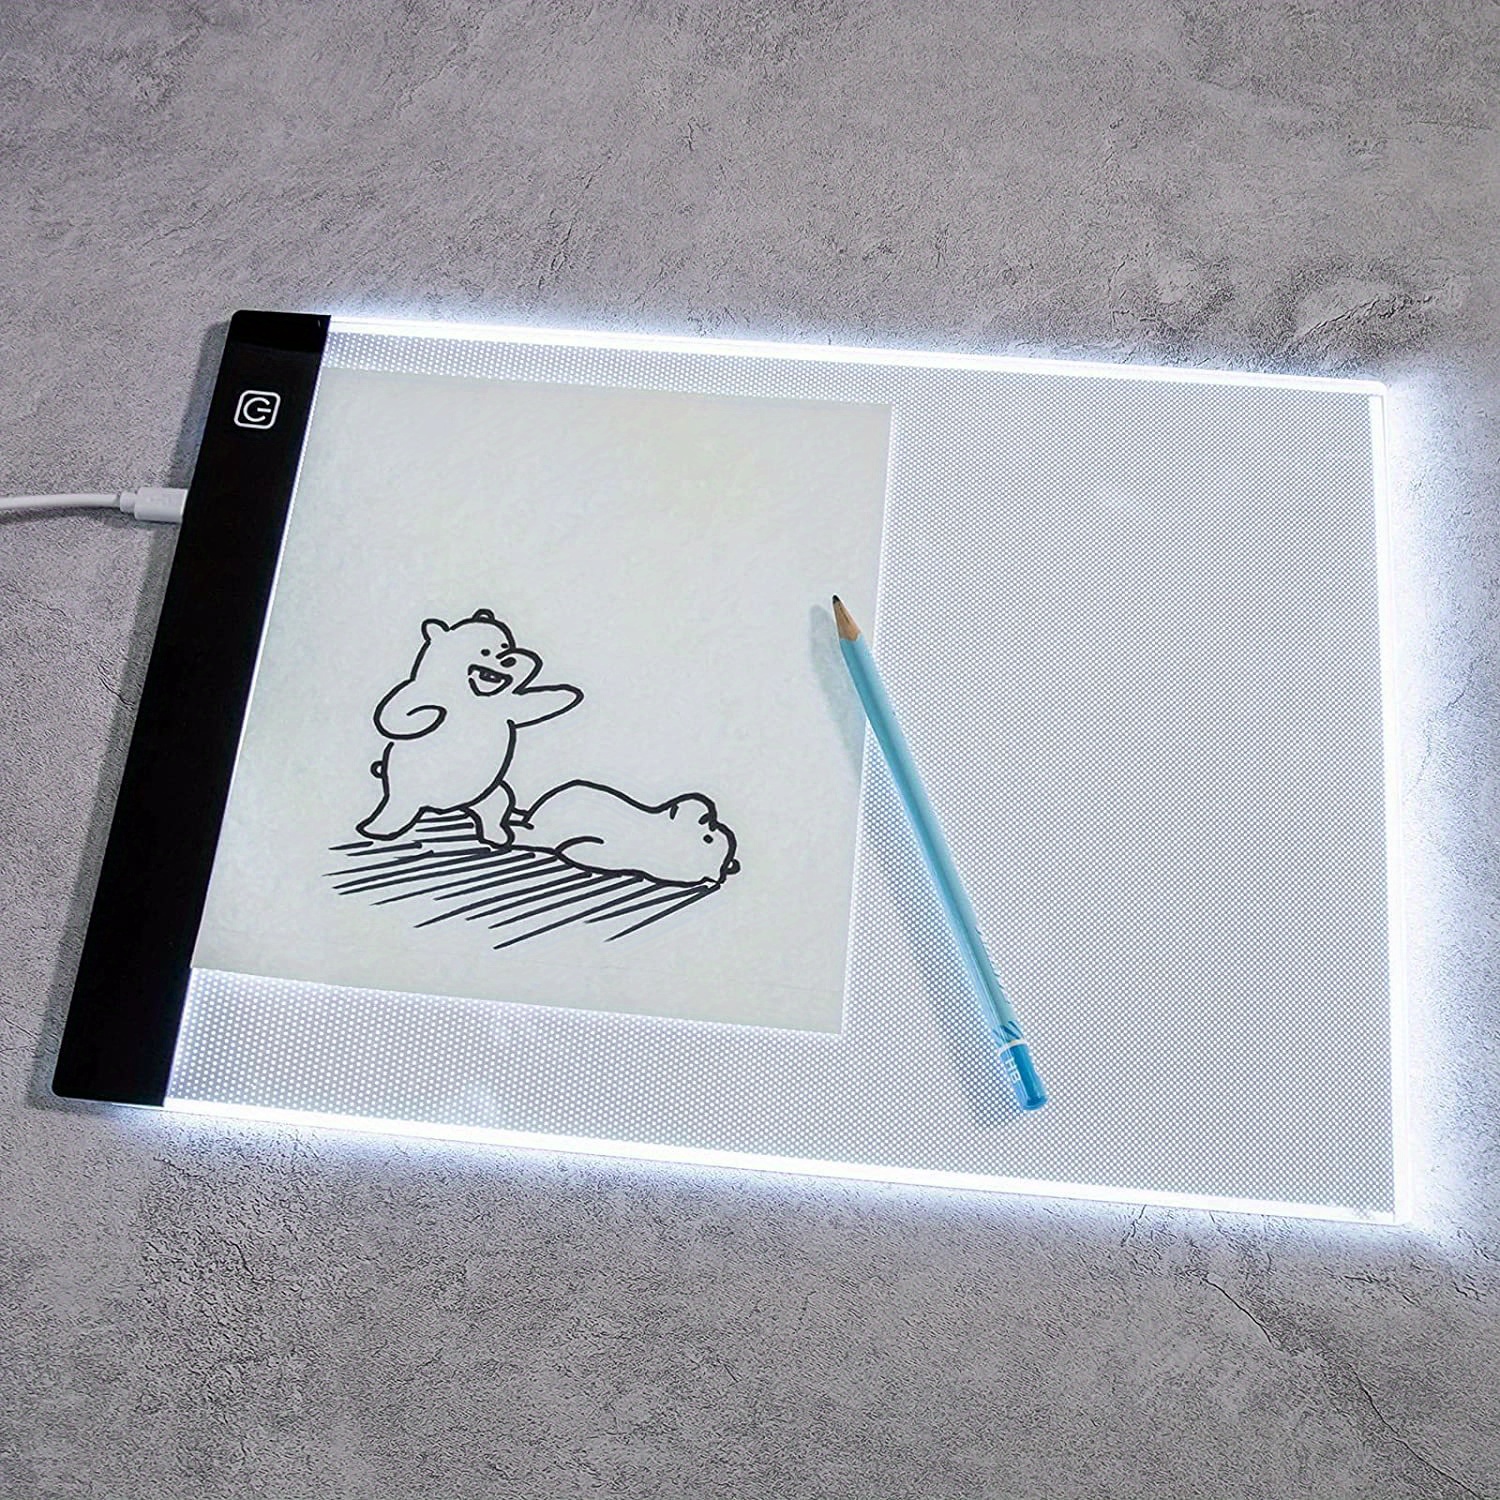 Portable A4 LED Light Box Tracer USB Powered Artist Drawing Pad Review 